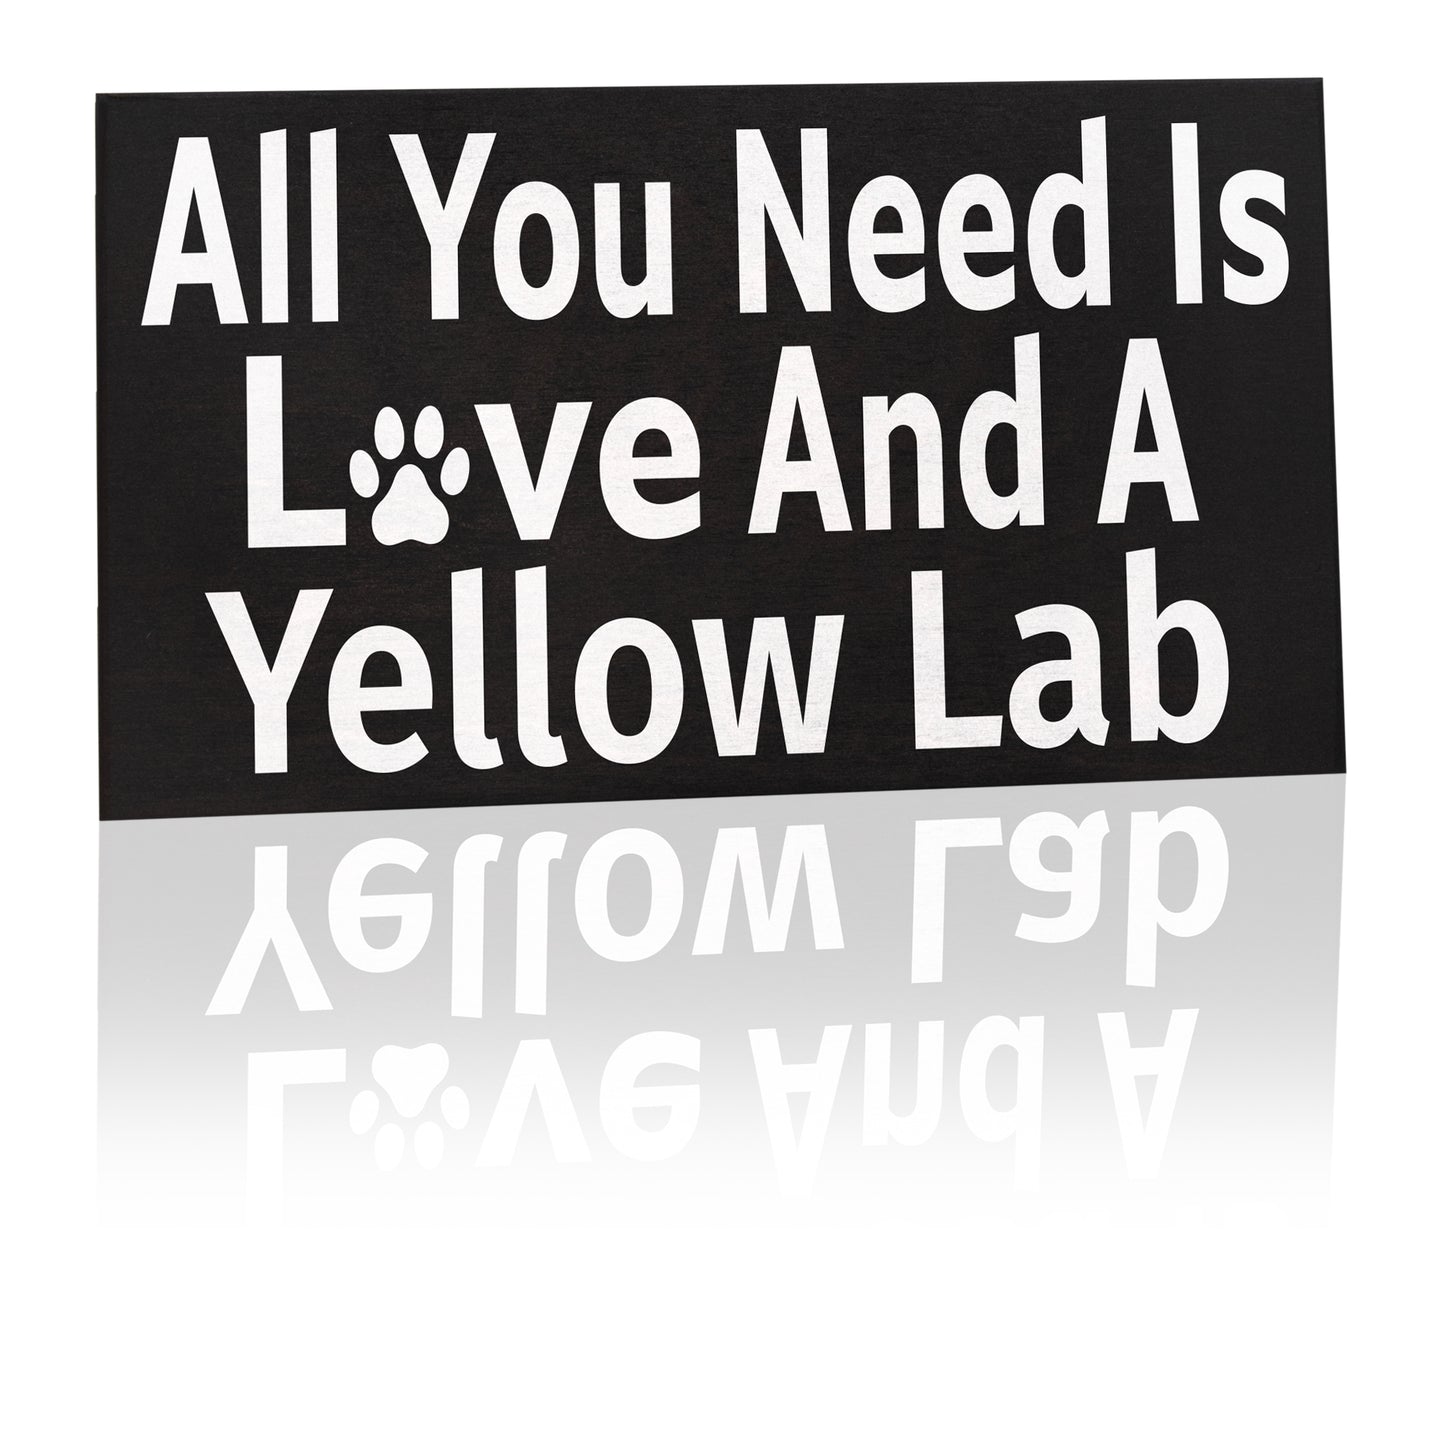 All You Need Is Love And A Yellow Lab